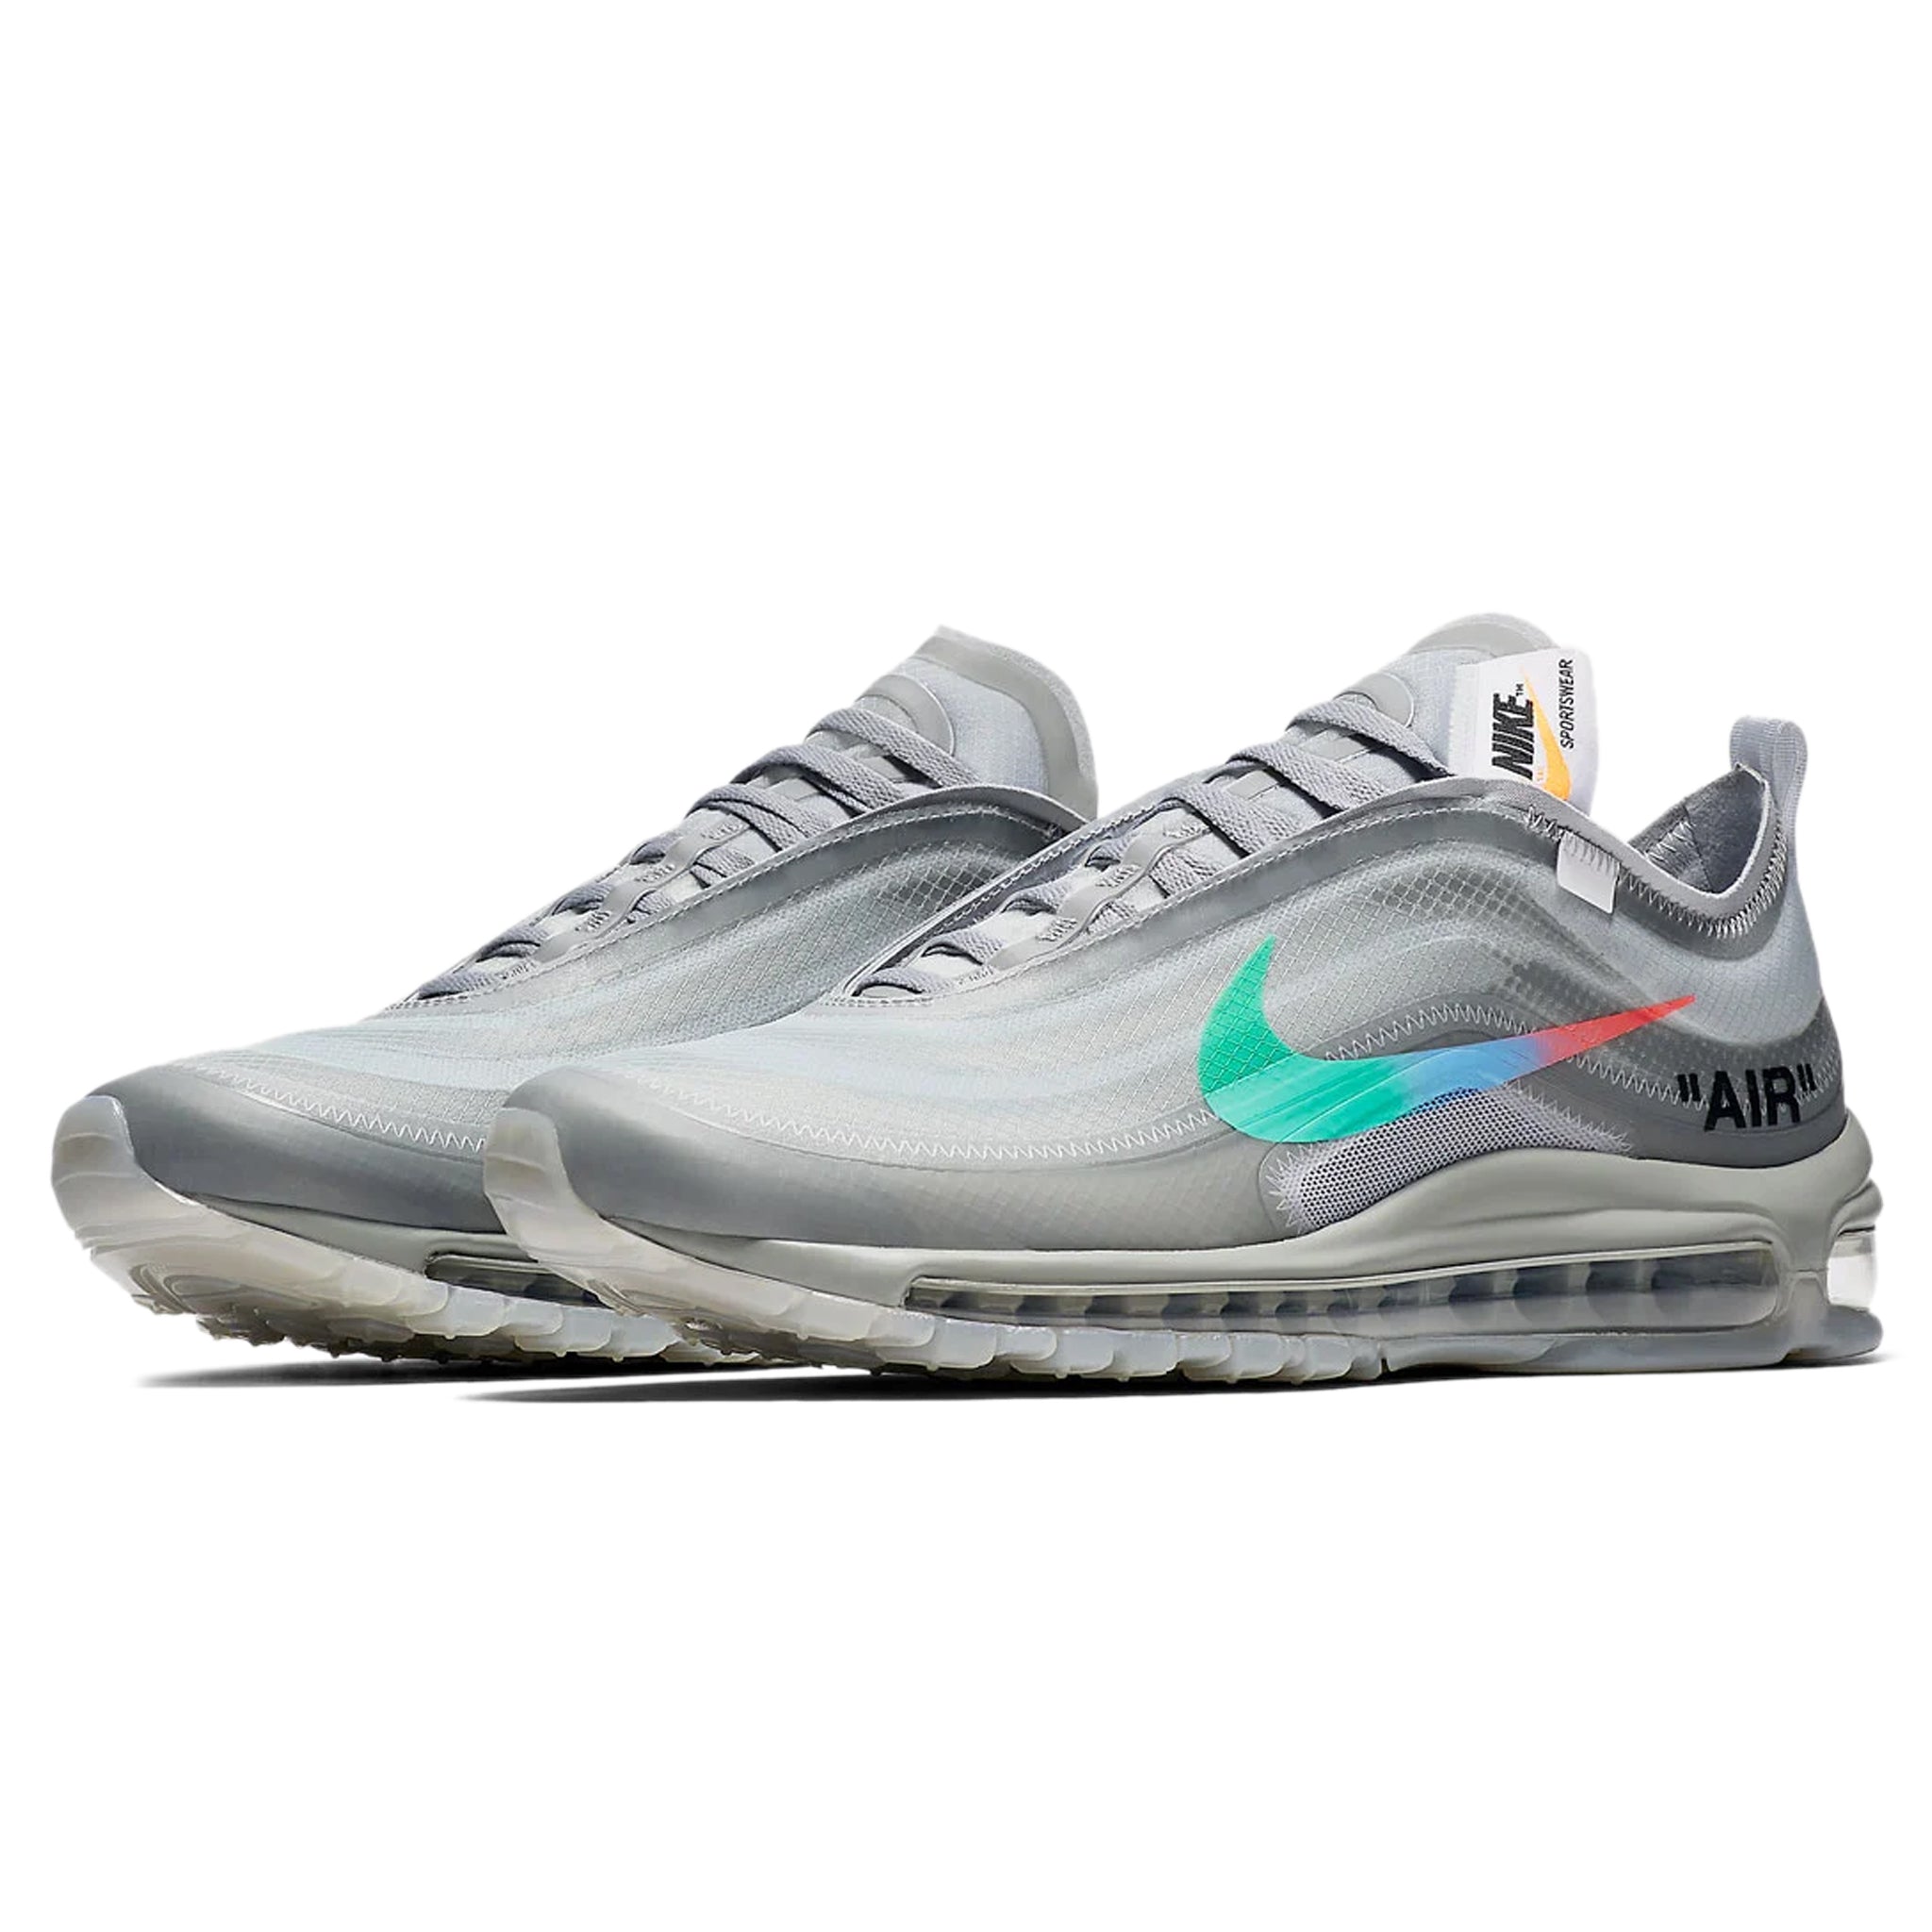 Front side view of Nike x Off White Air Max 97 Menta AJ4585-101